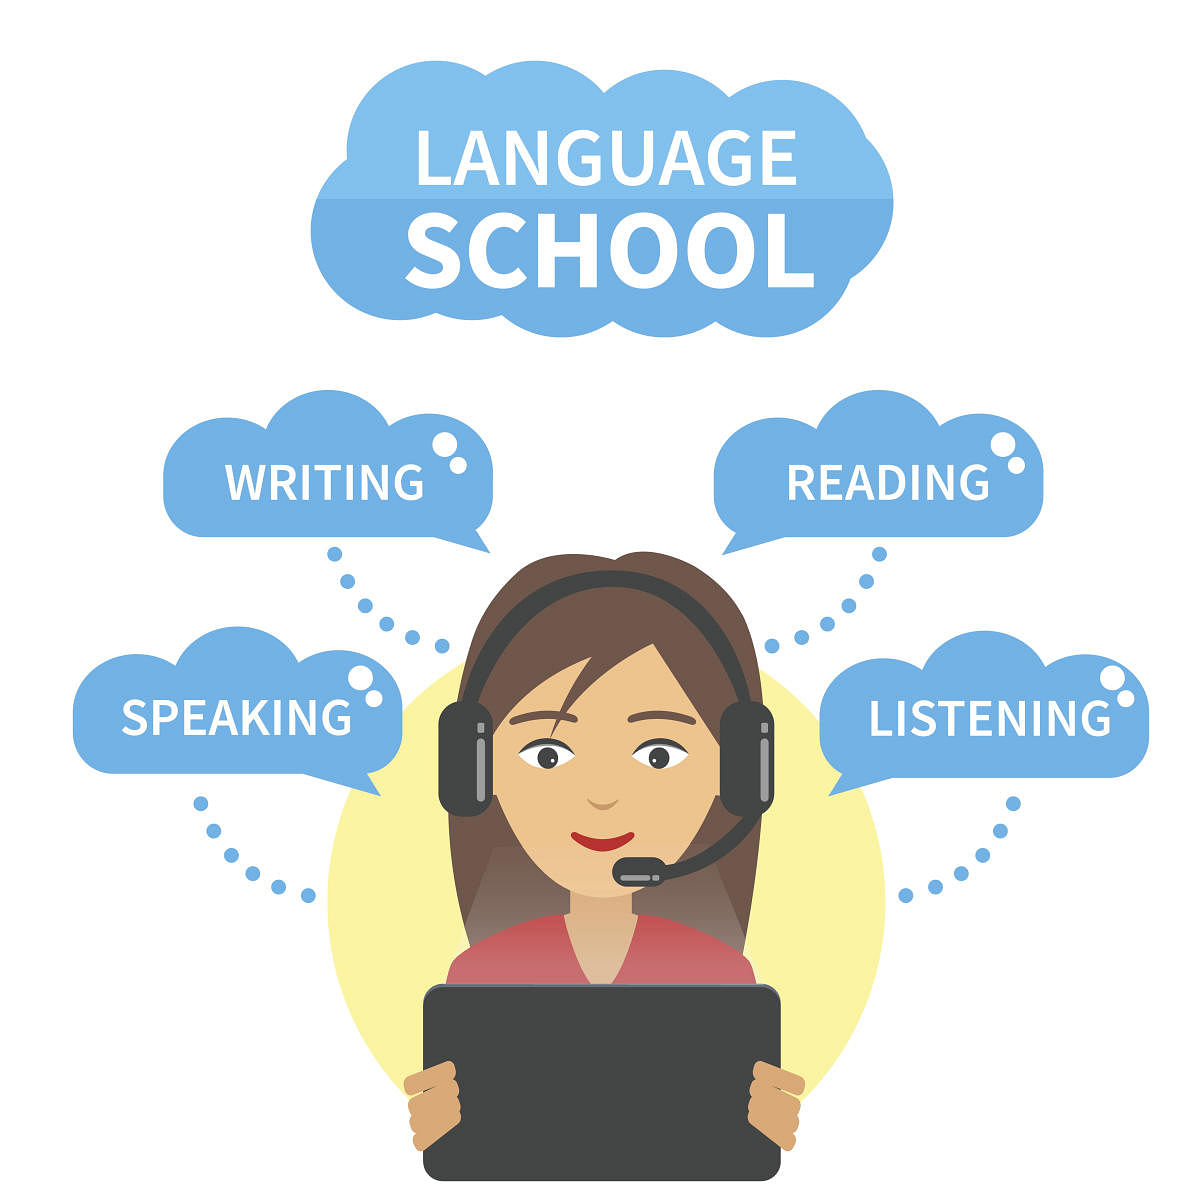 Vector Language school concept illustration. Girl in headphones with microphone look at tablet and study language speaking, writing, reading and listening.Vector Language school concept illustration. Girl in headphones with microphone look at tablet and